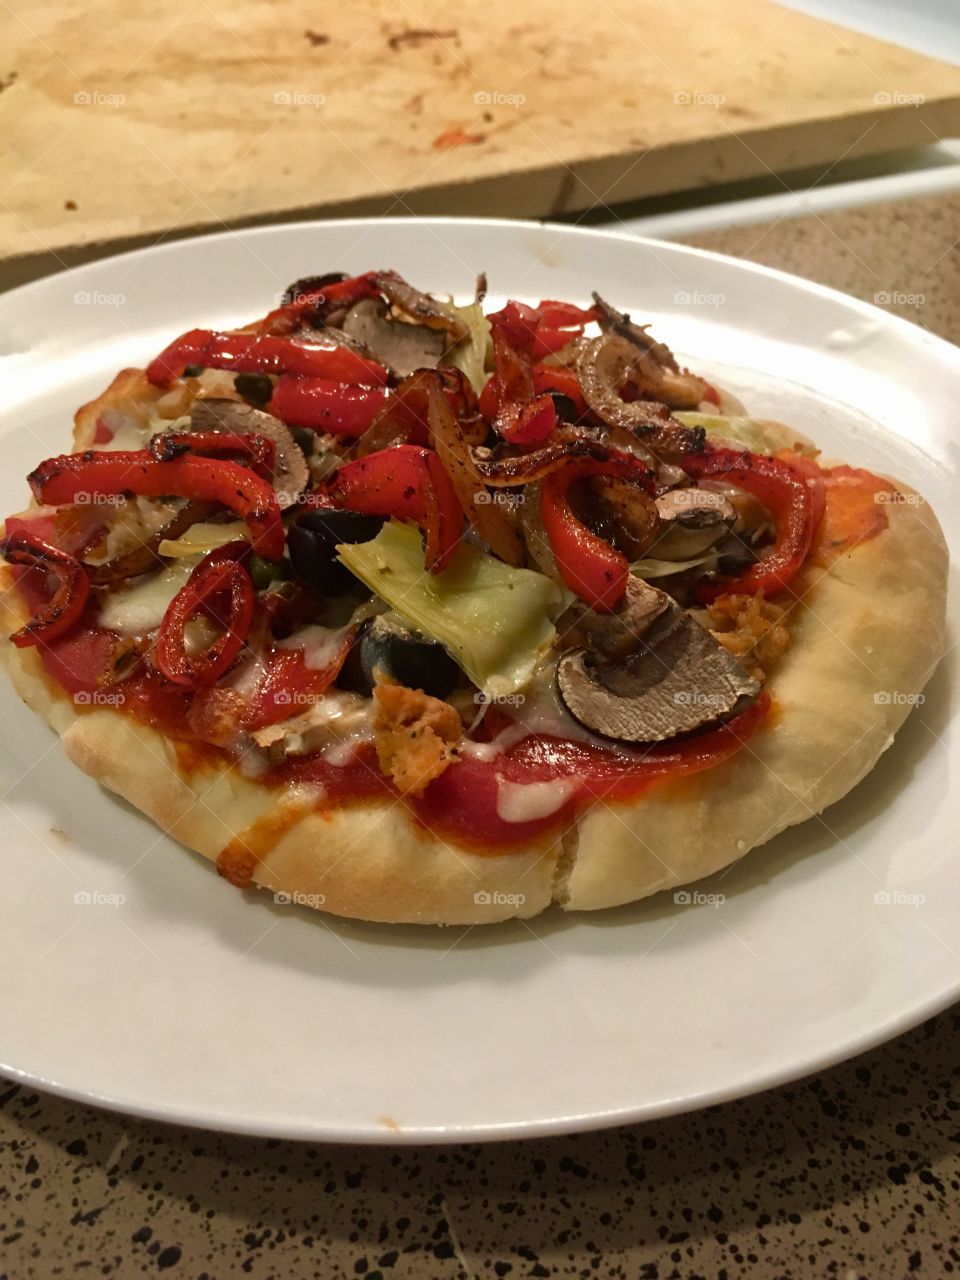 Personal pizza